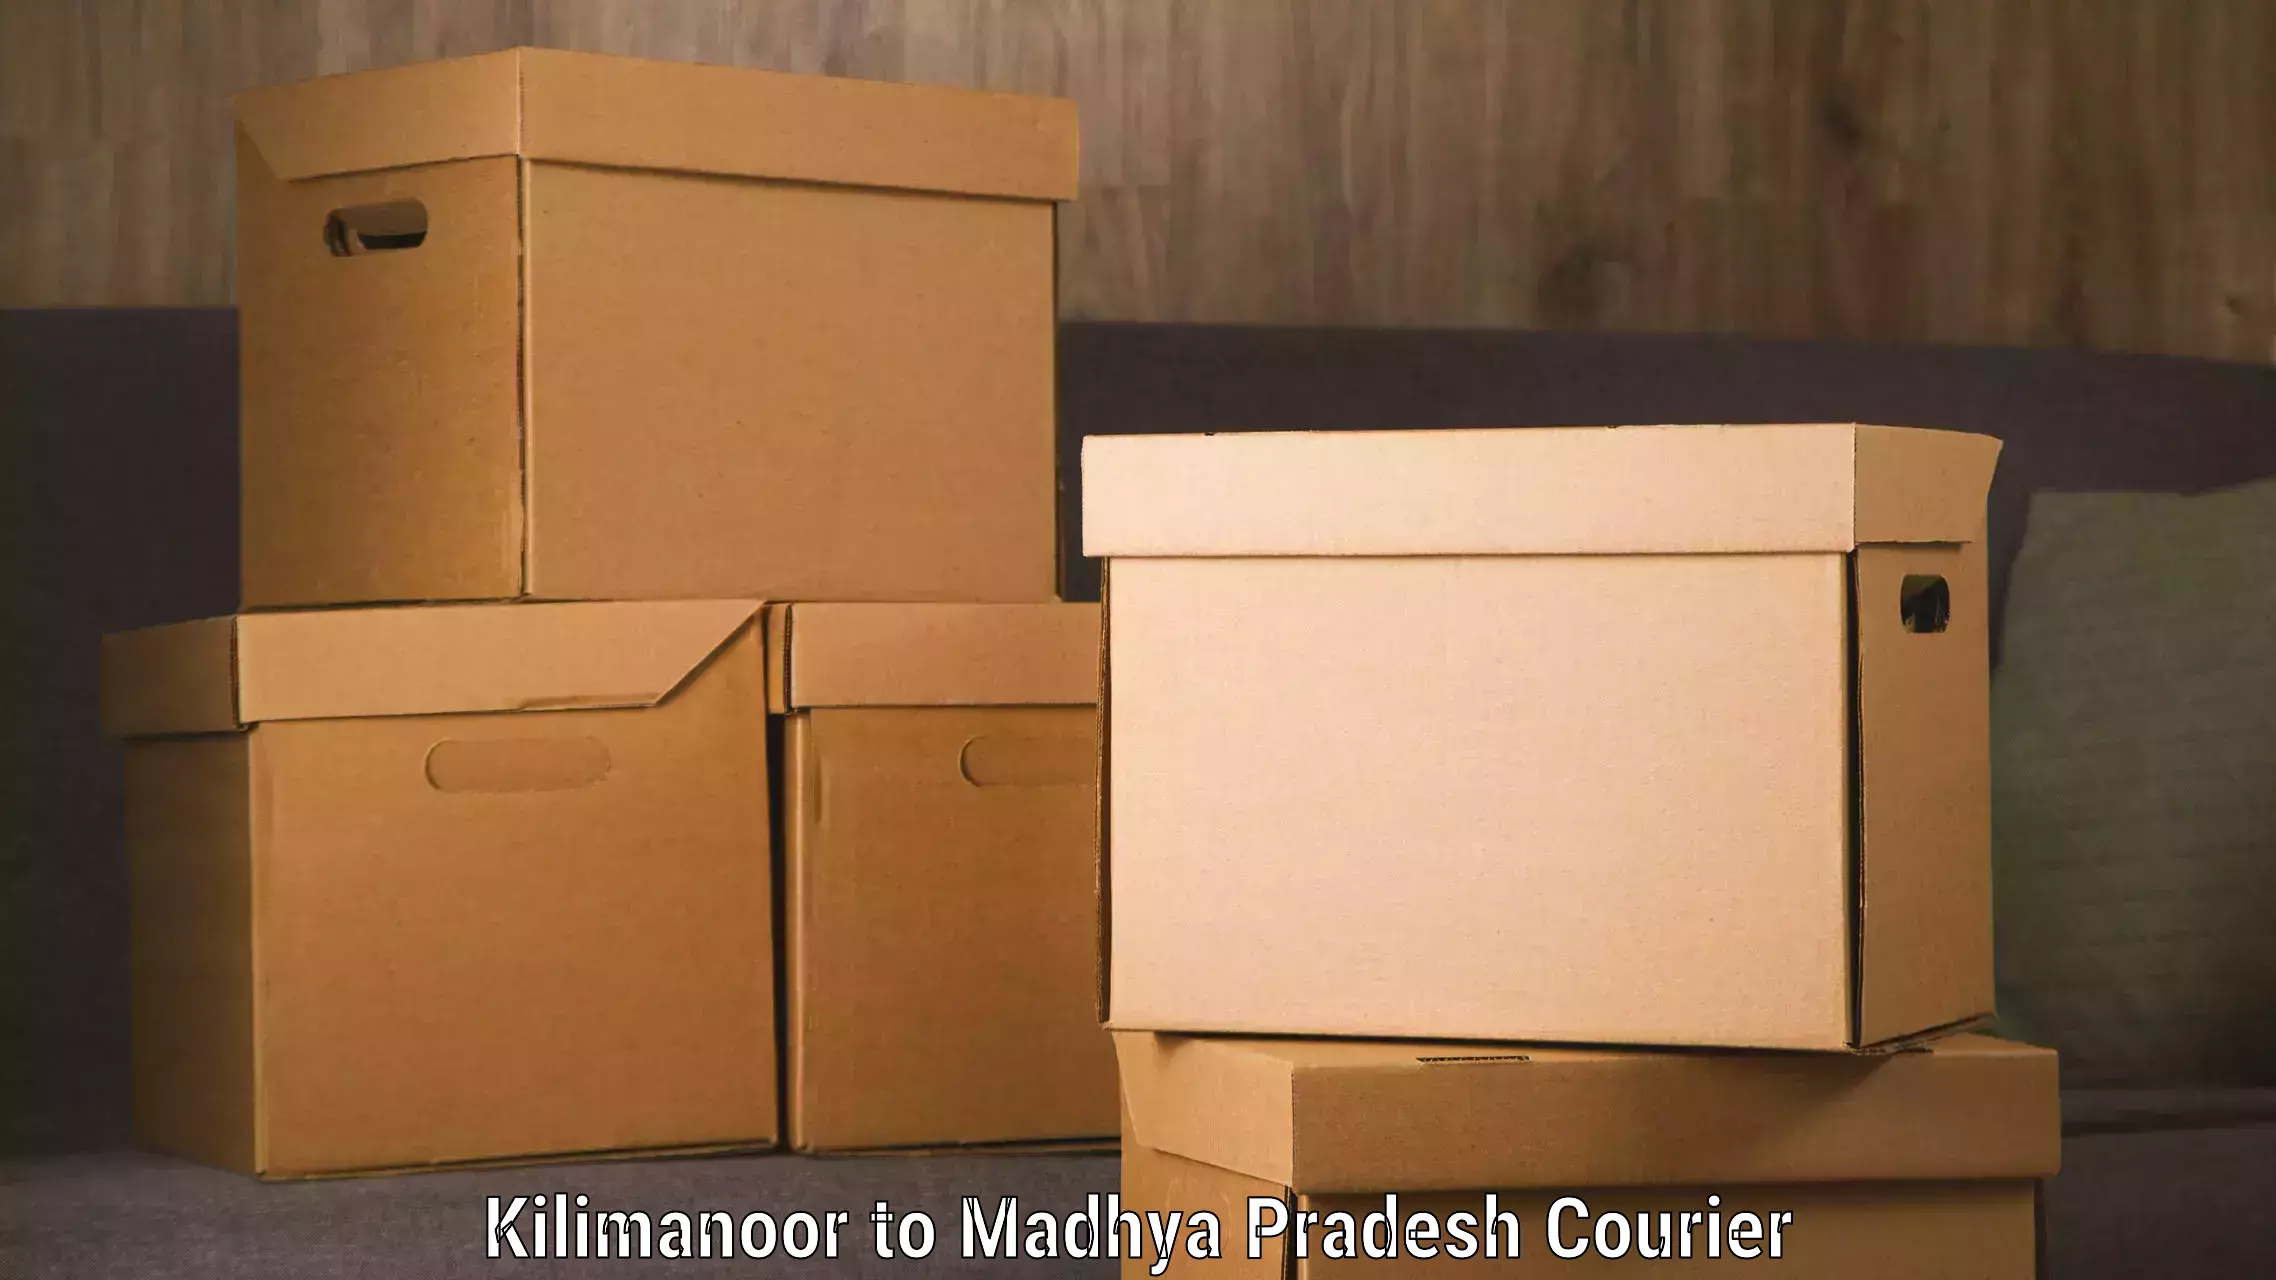 Express mail solutions Kilimanoor to Indore